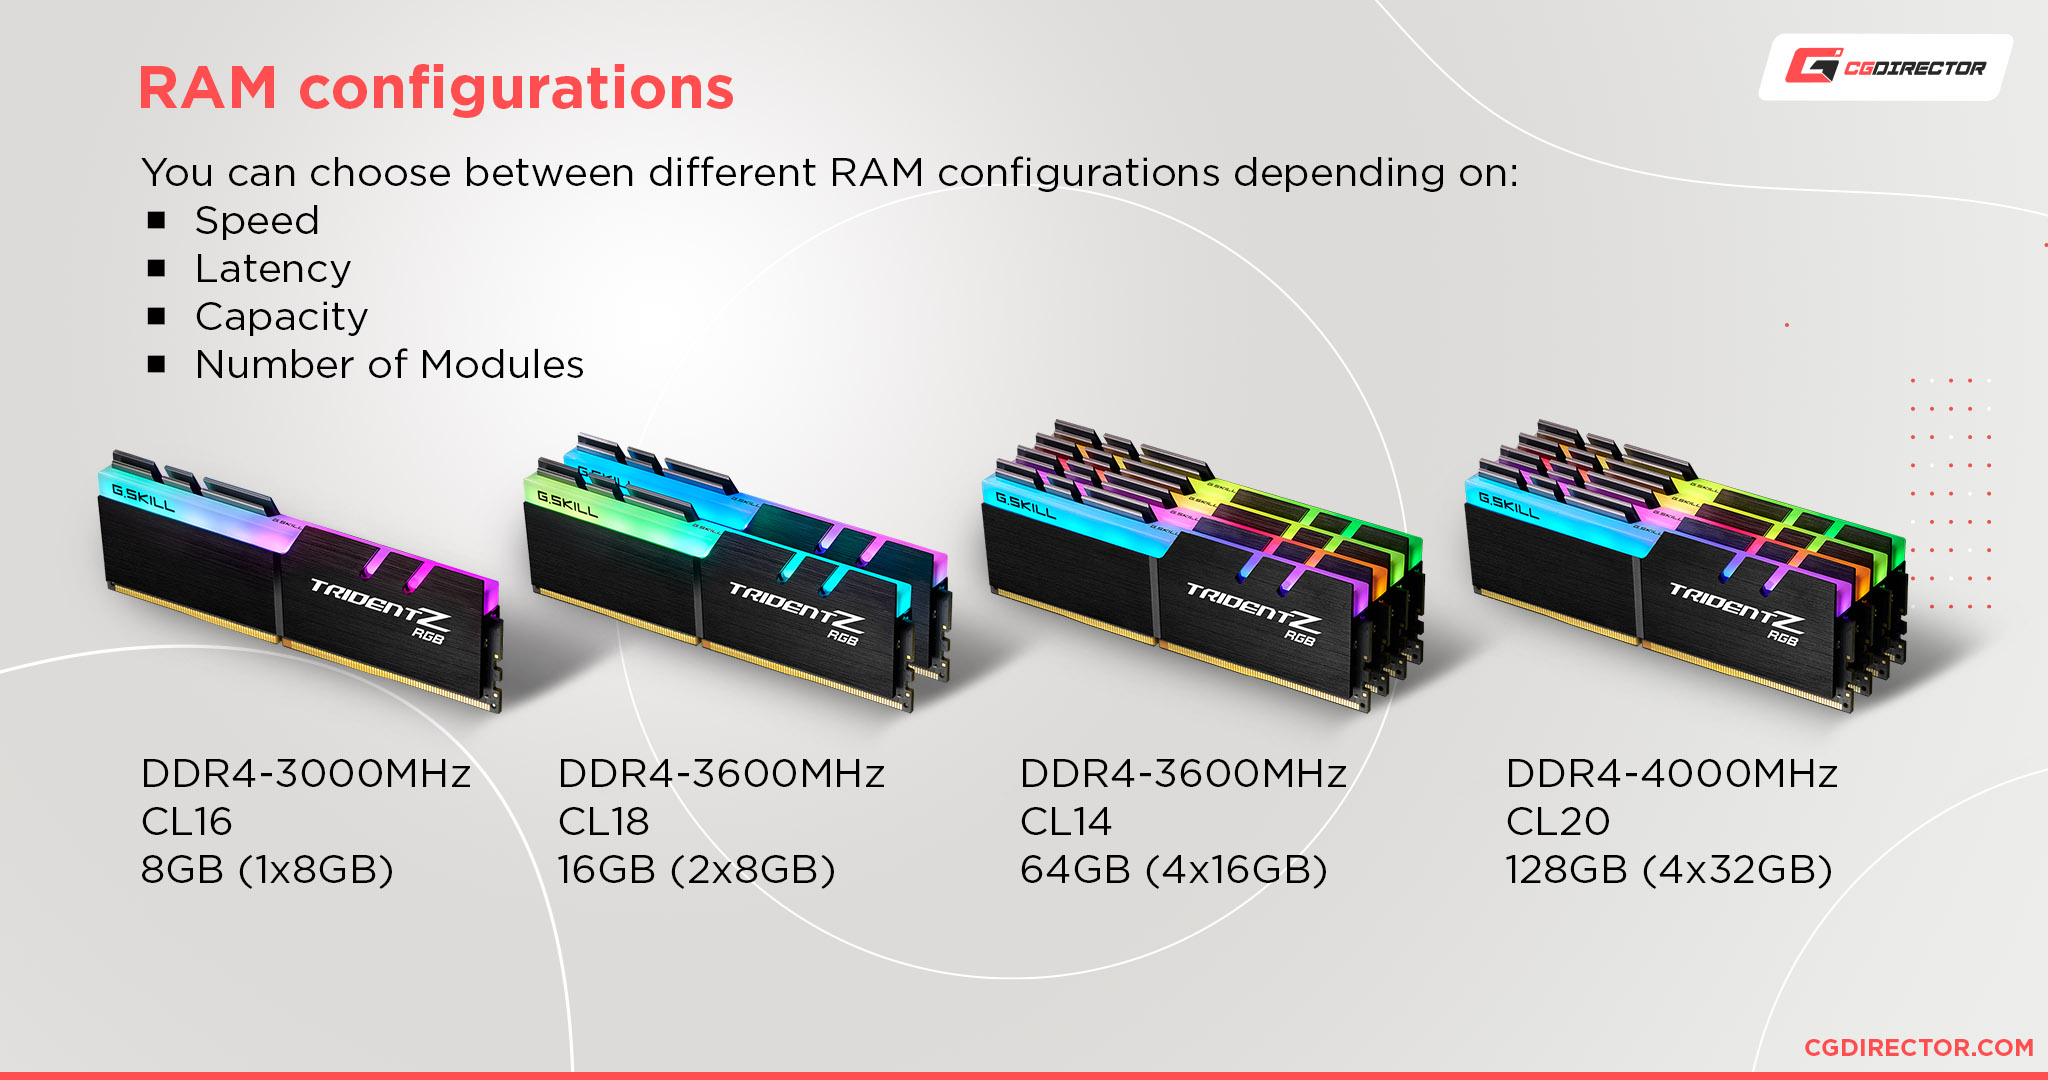 2 Vs 4 Ram Modules Are There Any Differences